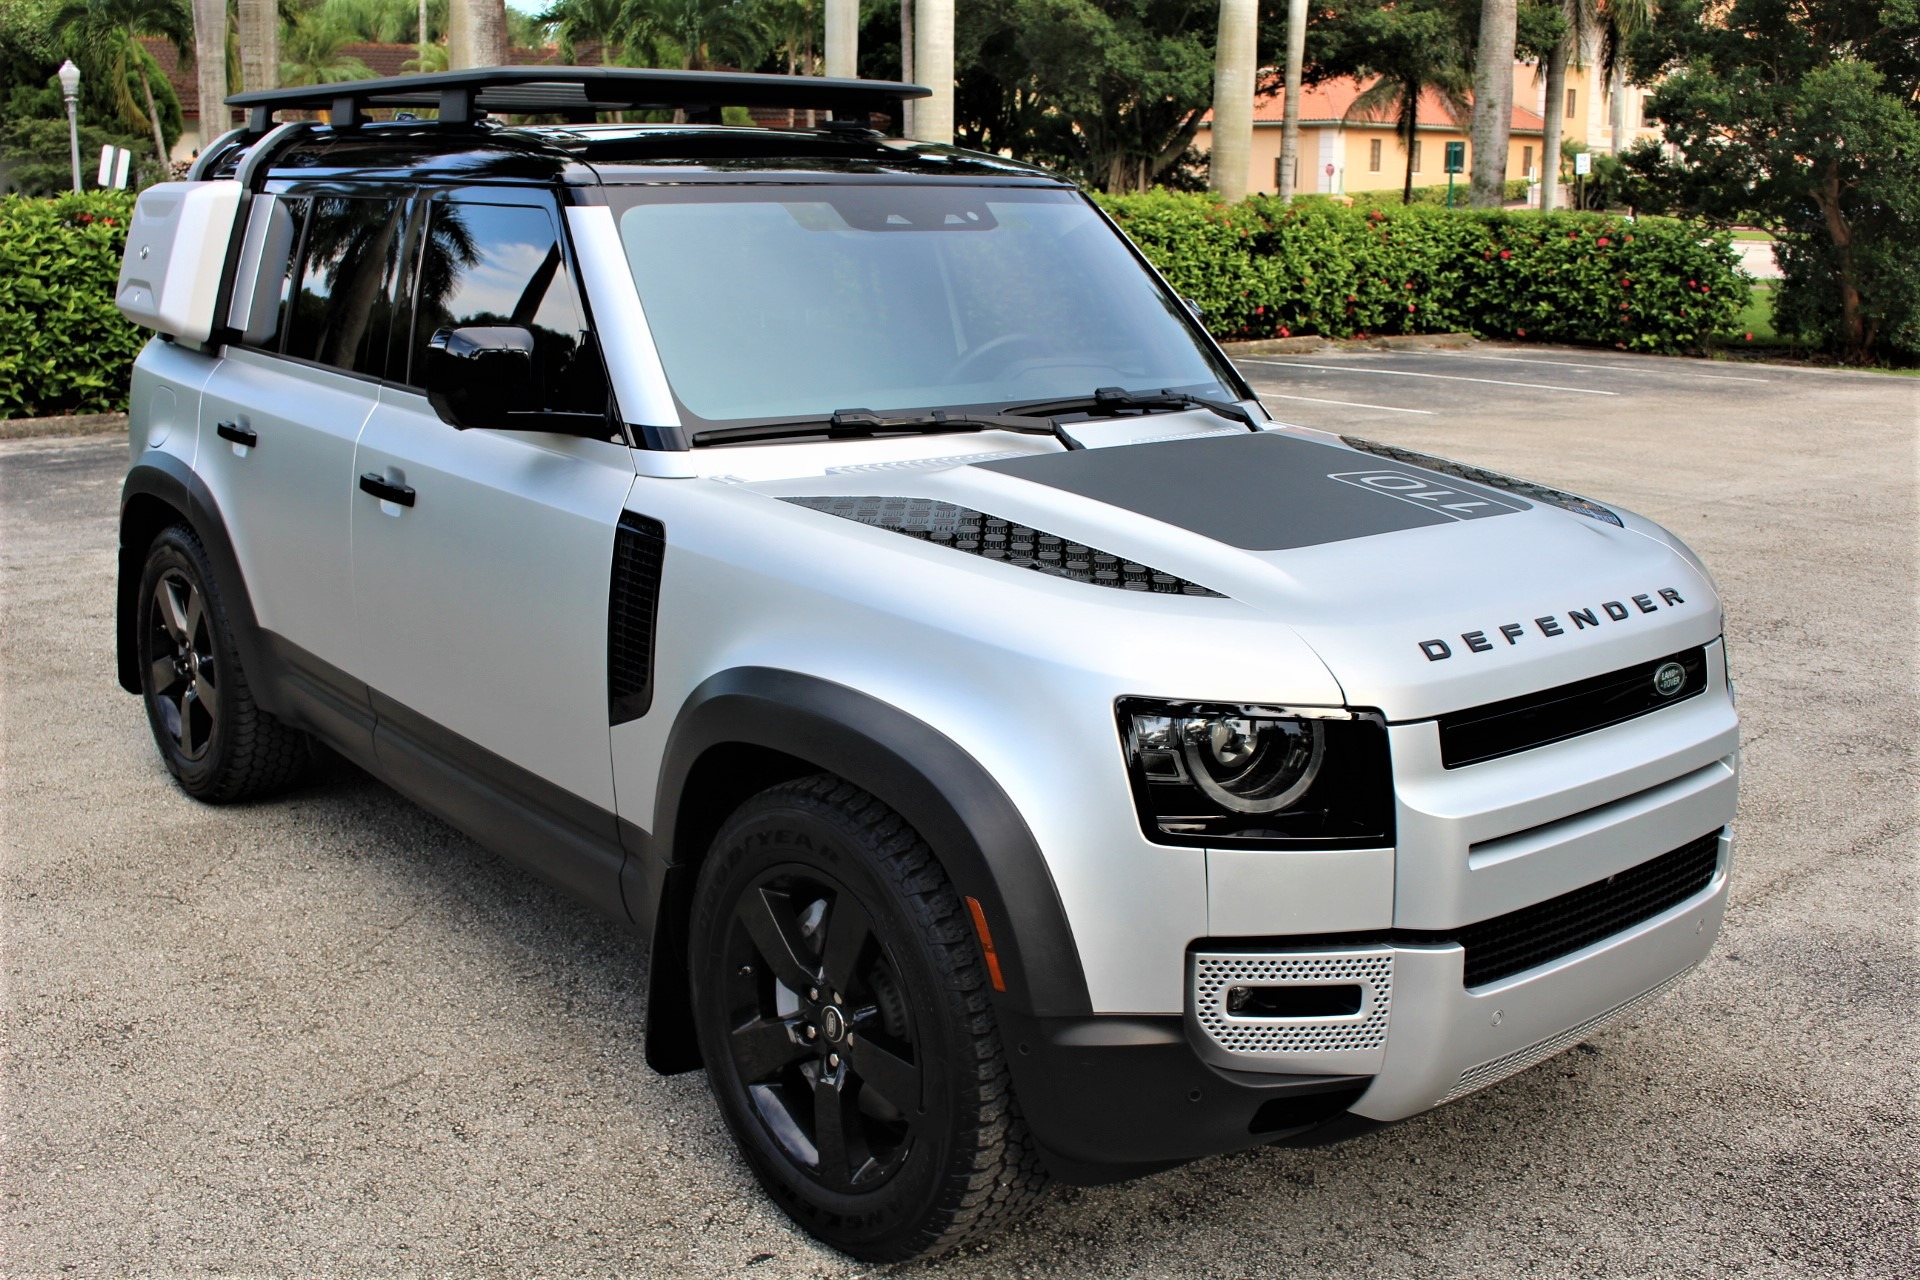 Used 2020 Land Rover Defender 110 HSE for sale Sold at The Gables Sports Cars in Miami FL 33146 2